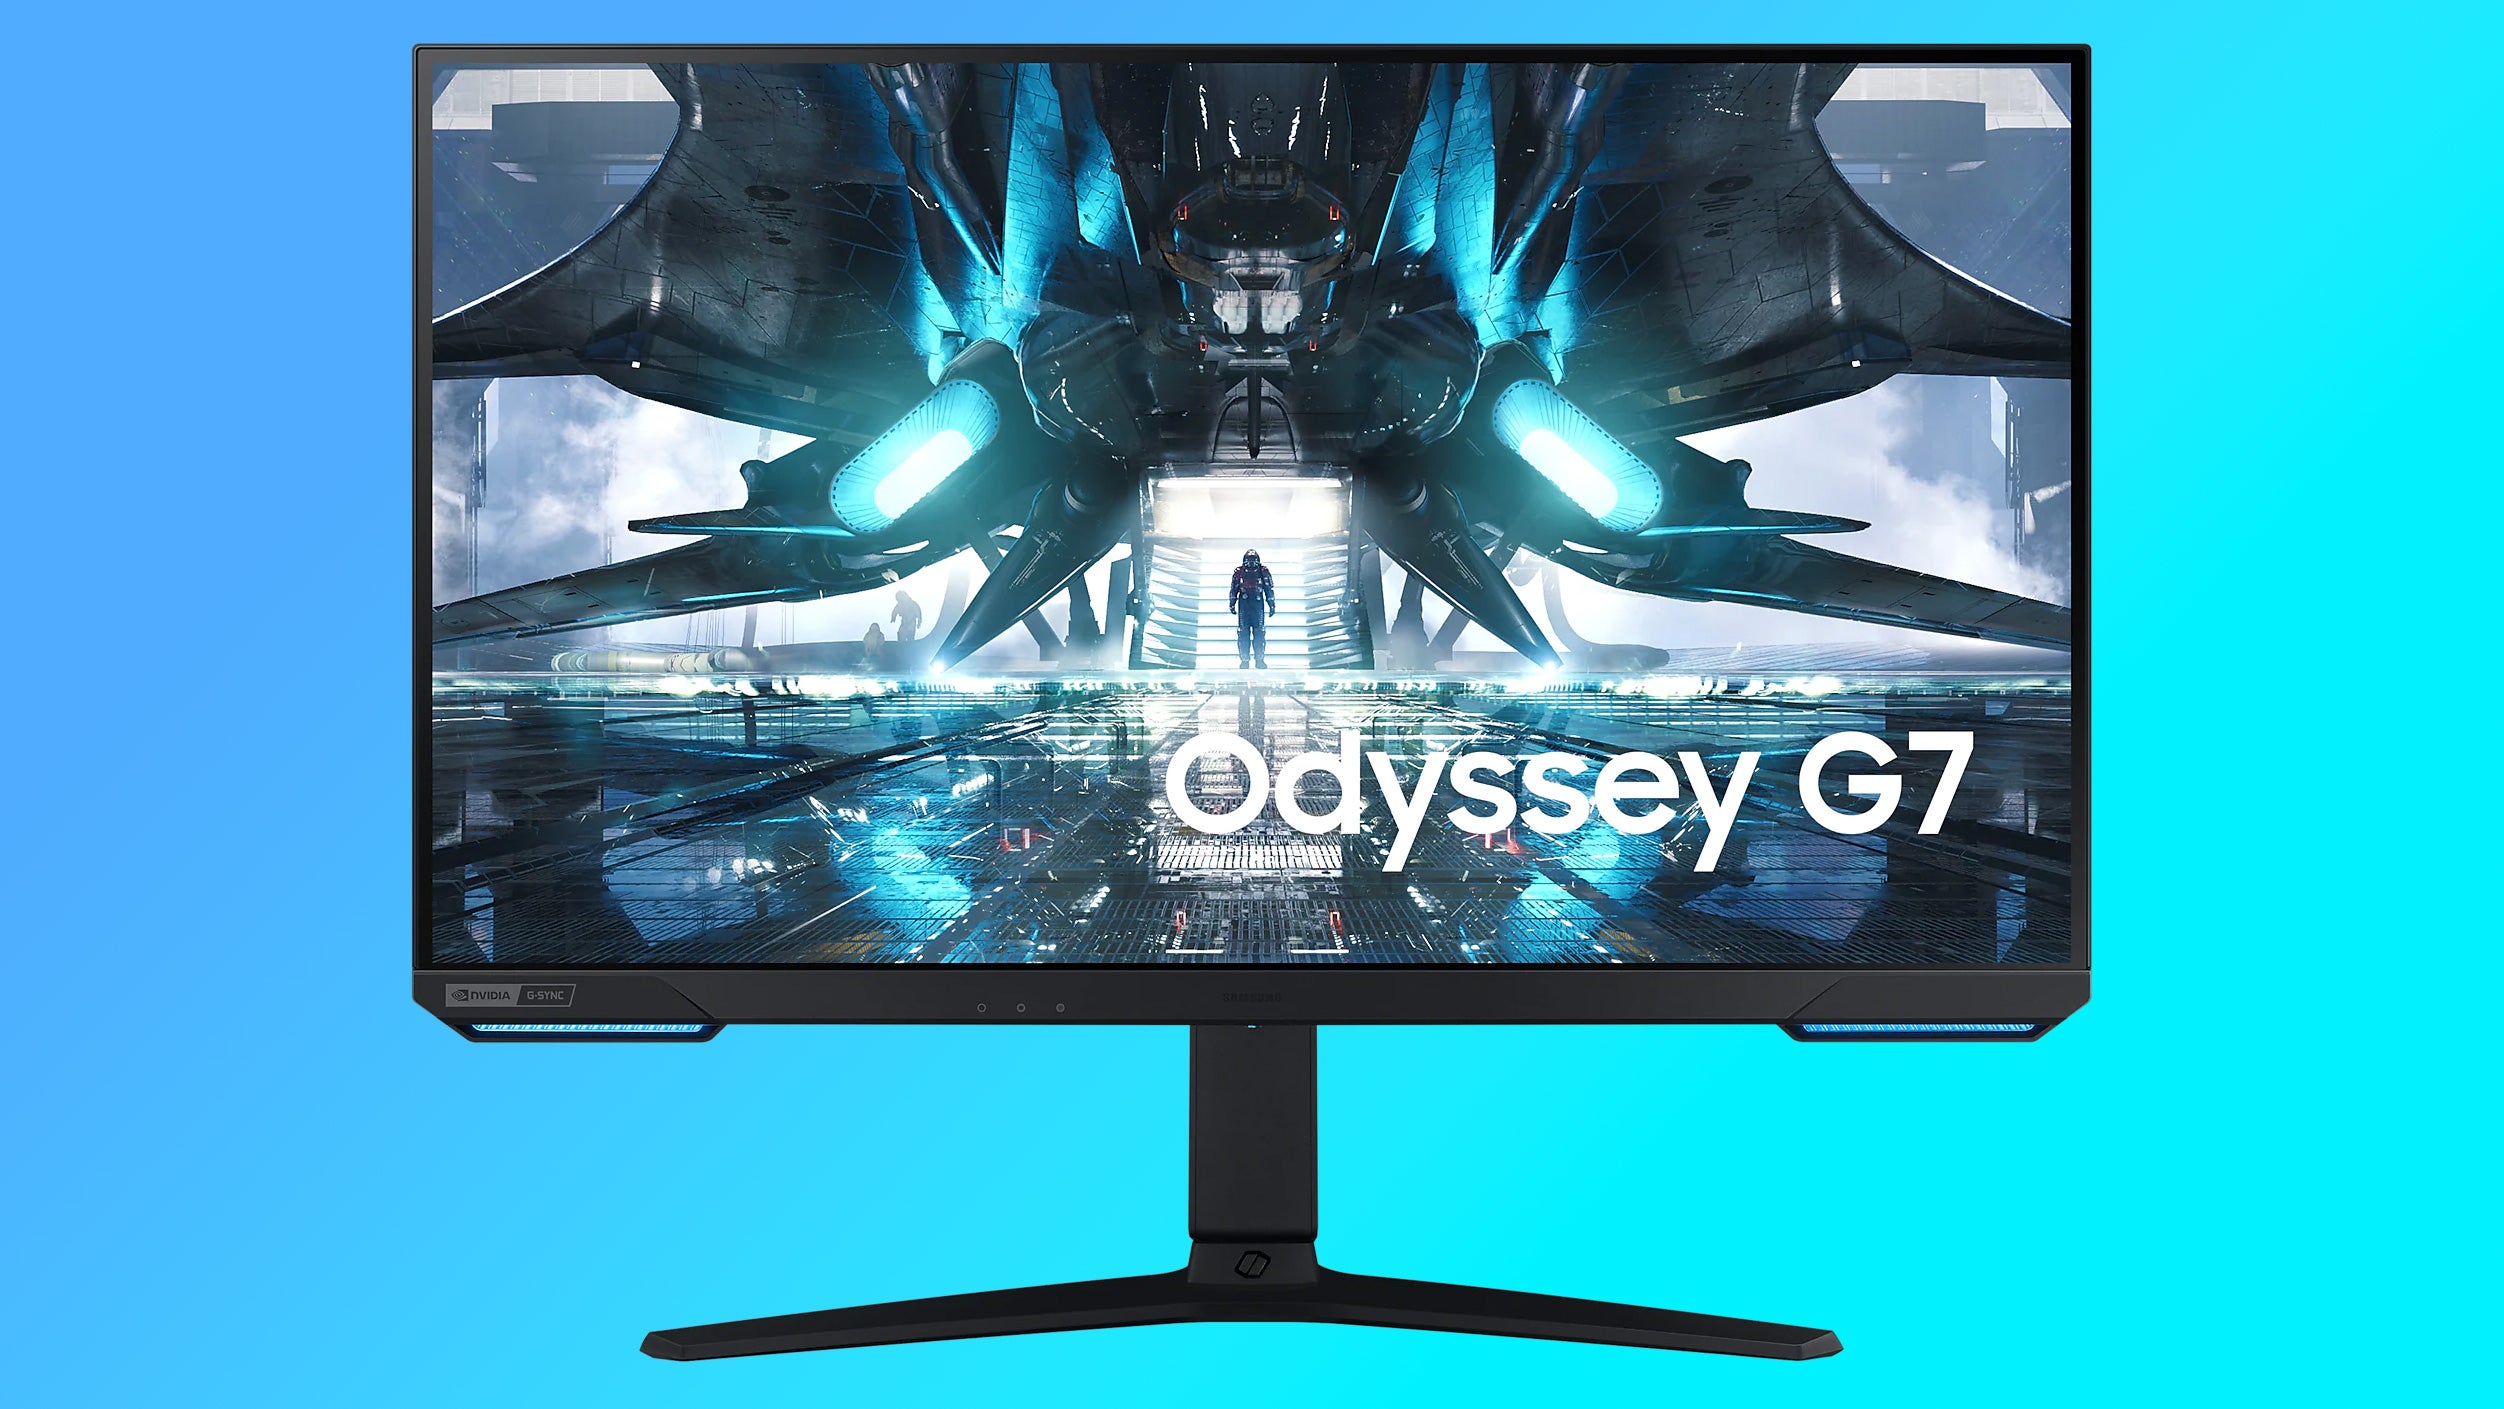 a samsung odyssey g7, specifically a 28-in 4k 144hz unit with hdmi 2.1, on a coloured background that emphasises its space-age design.